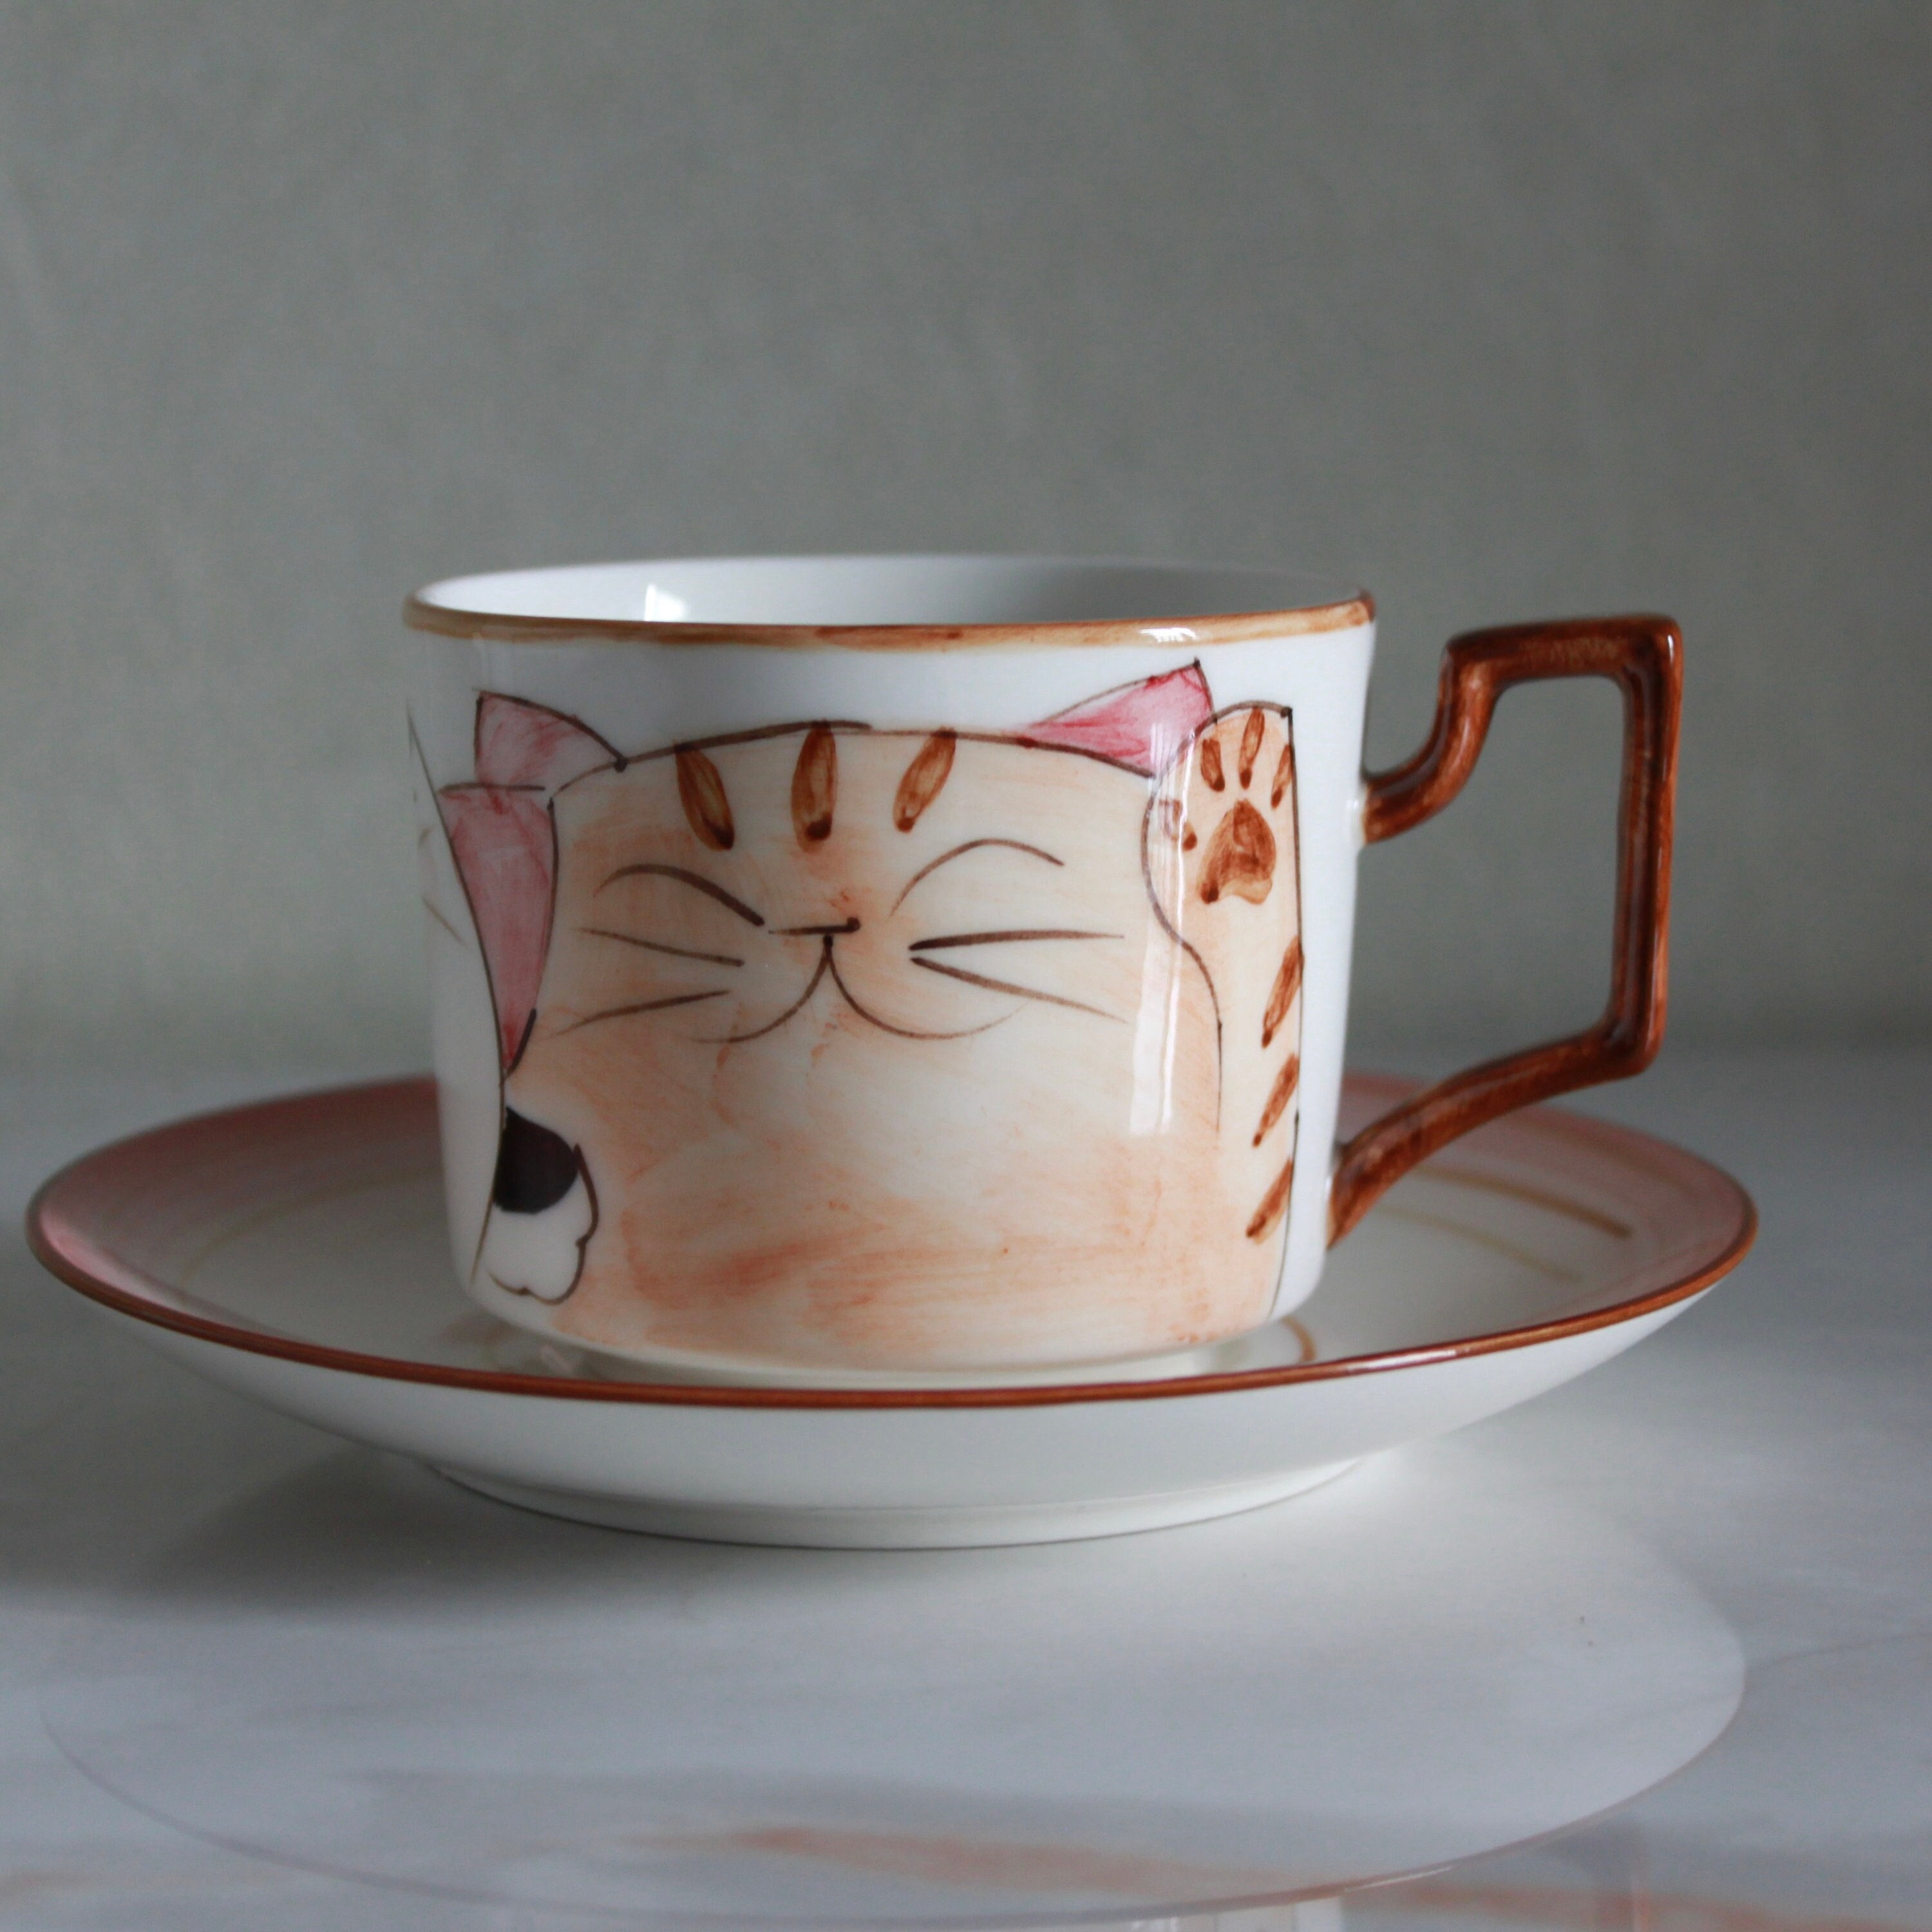 1pc Ceramic Mug With Cover & Saucer Featuring Cartoon Cat For Kids, Milk Or  Coffee Cup, Cute Breakfast Cup